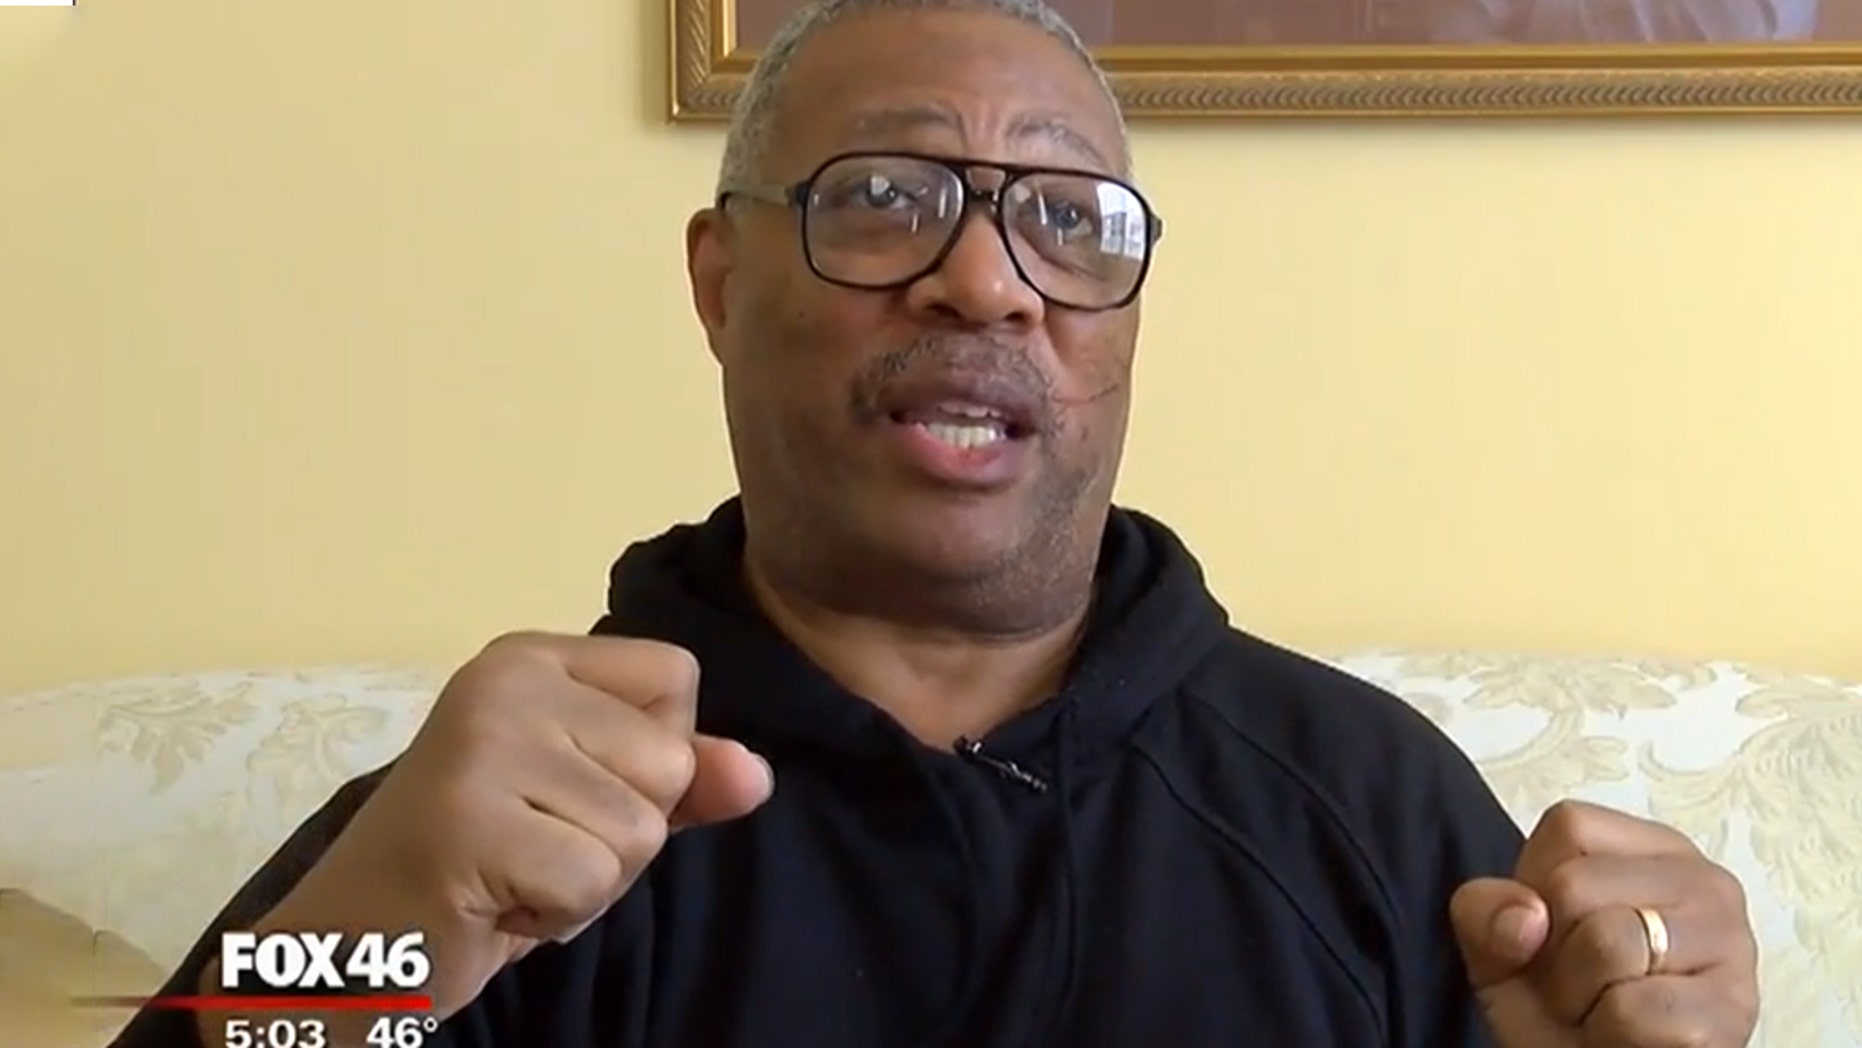 Charlotte pastor says he prayed with knife-wielding attacker before suffering cuts to face